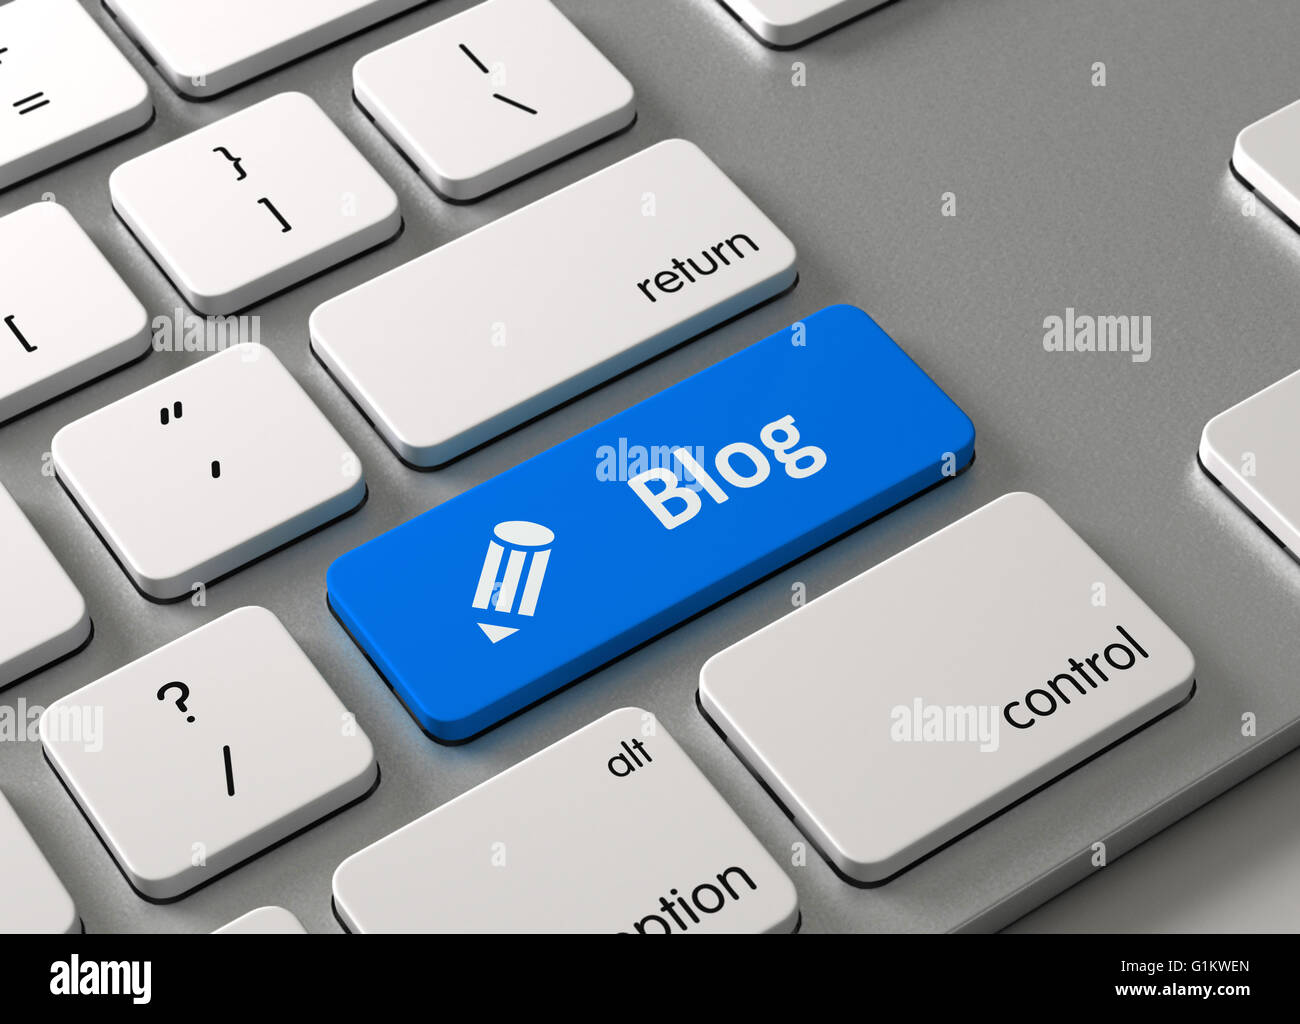 A keyboard with a blue button Blog Stock Photo